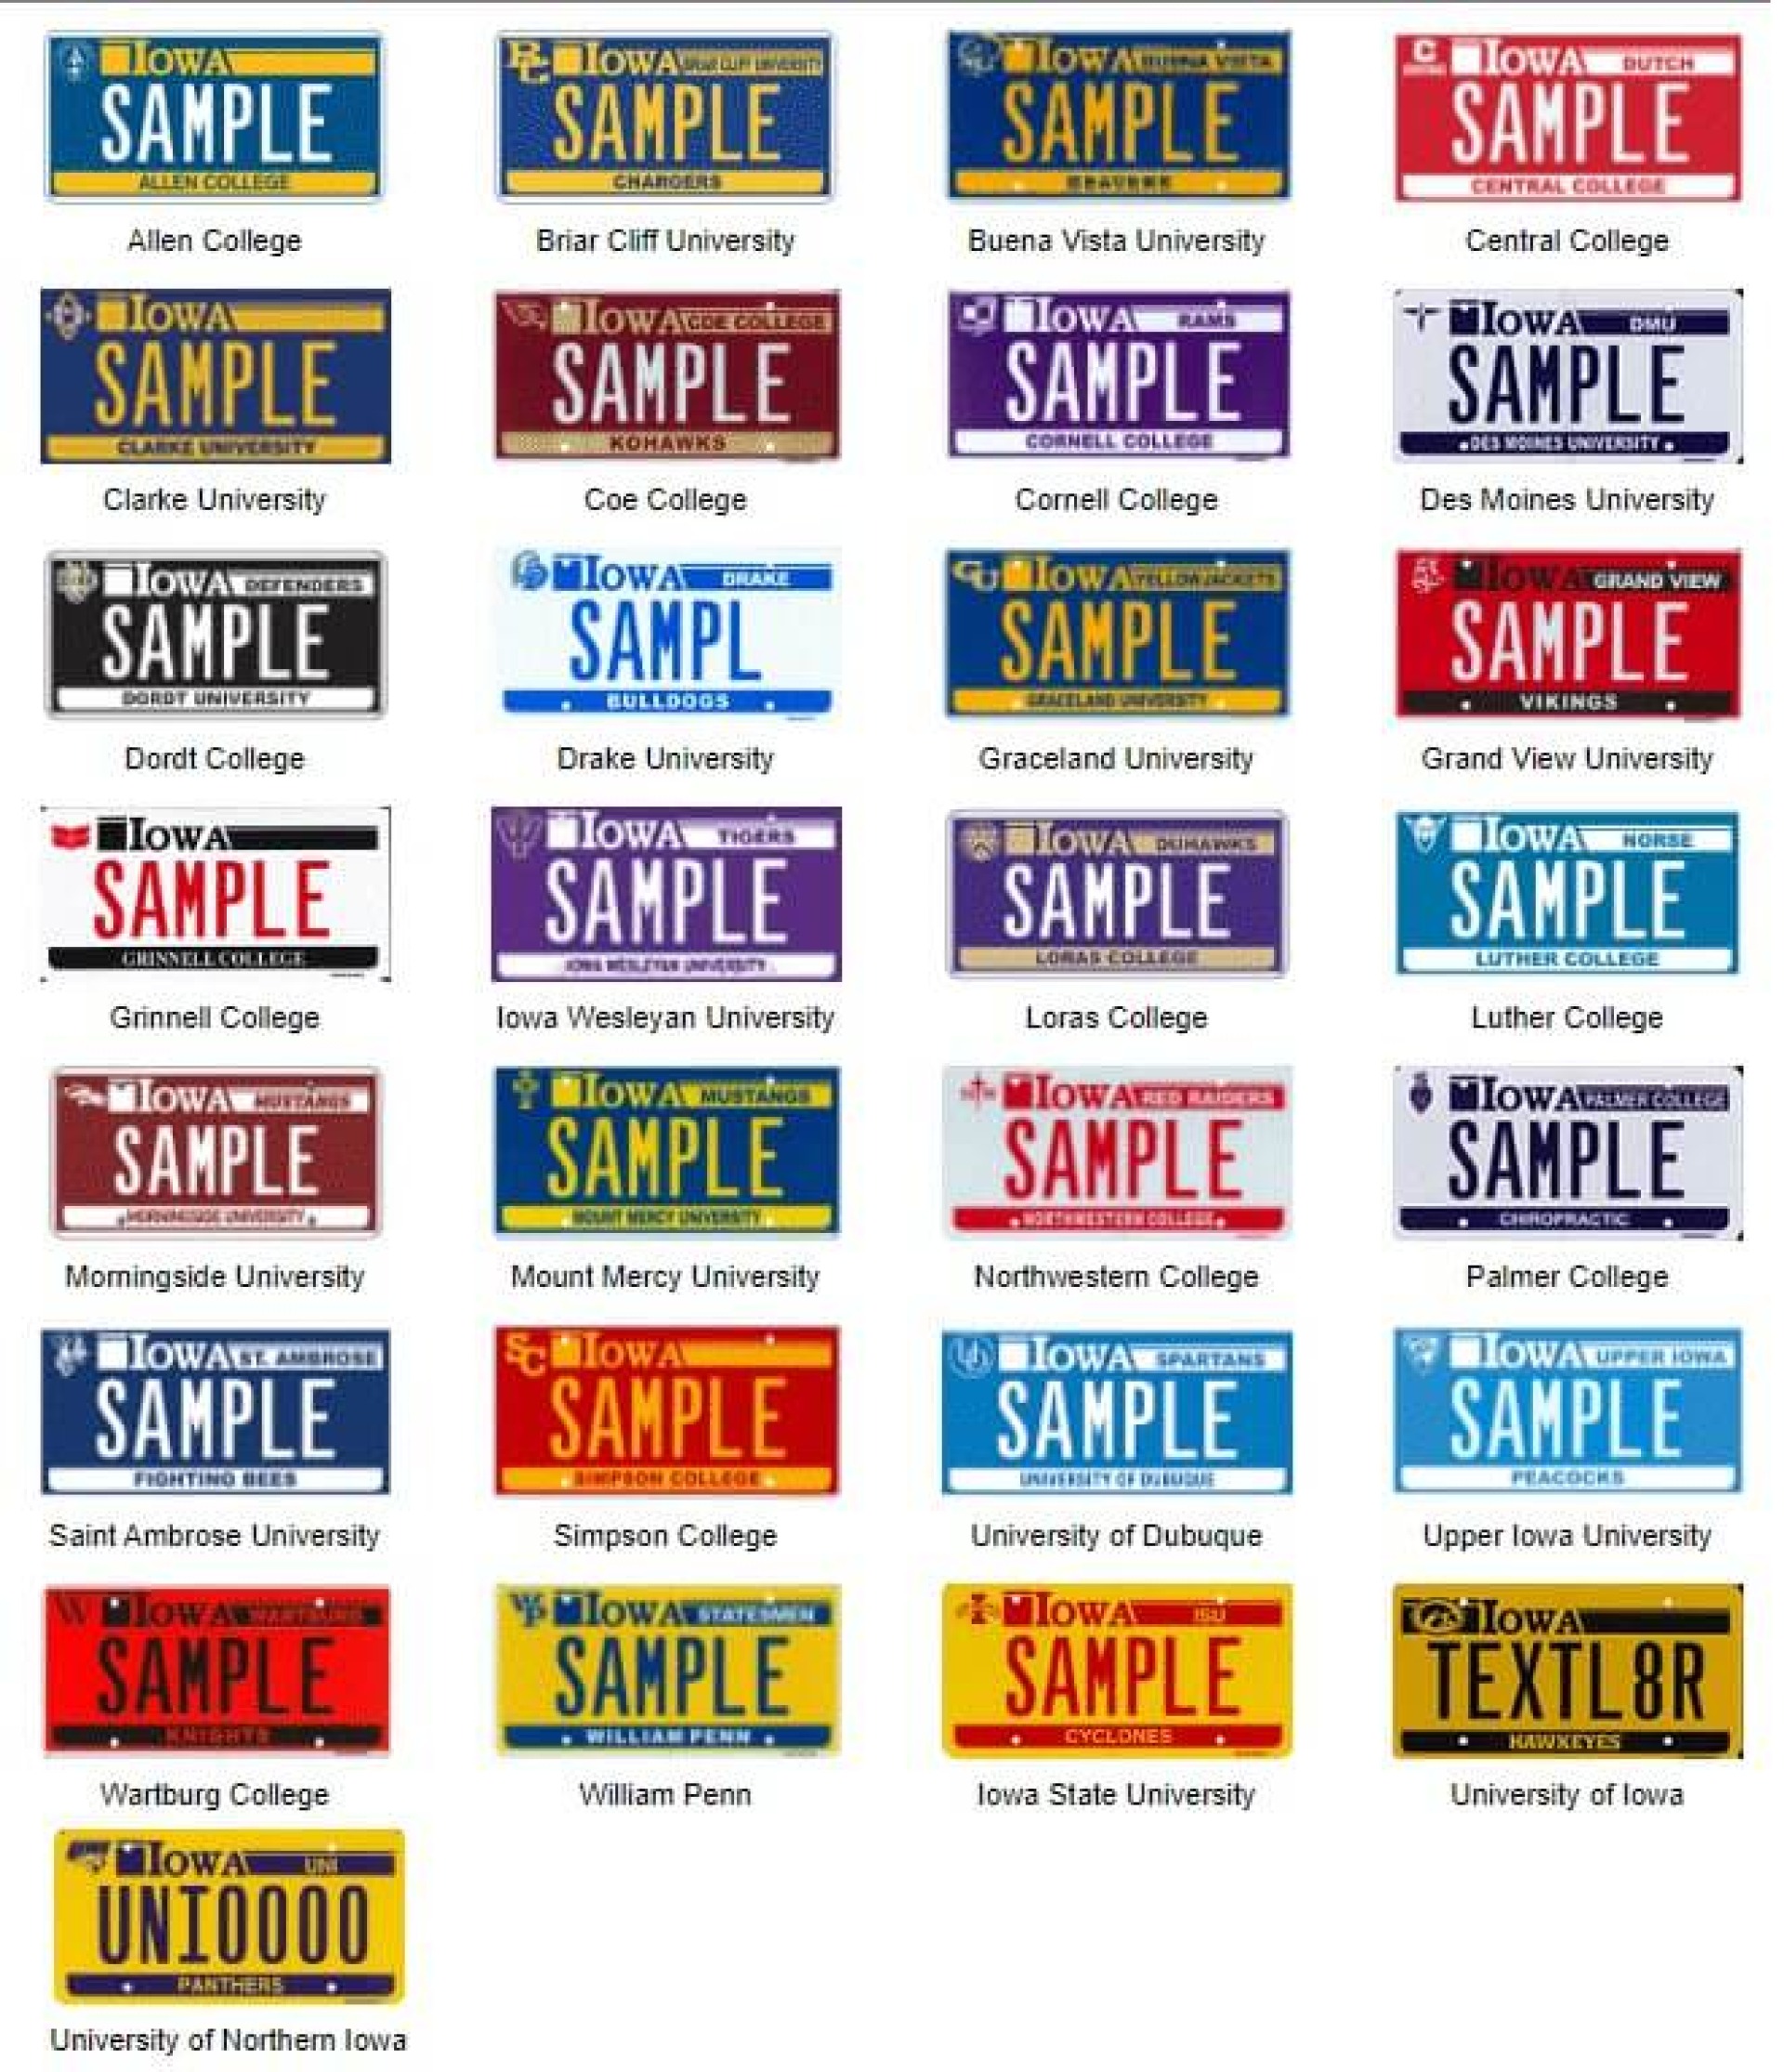 Specialty License Plate Options - Universities